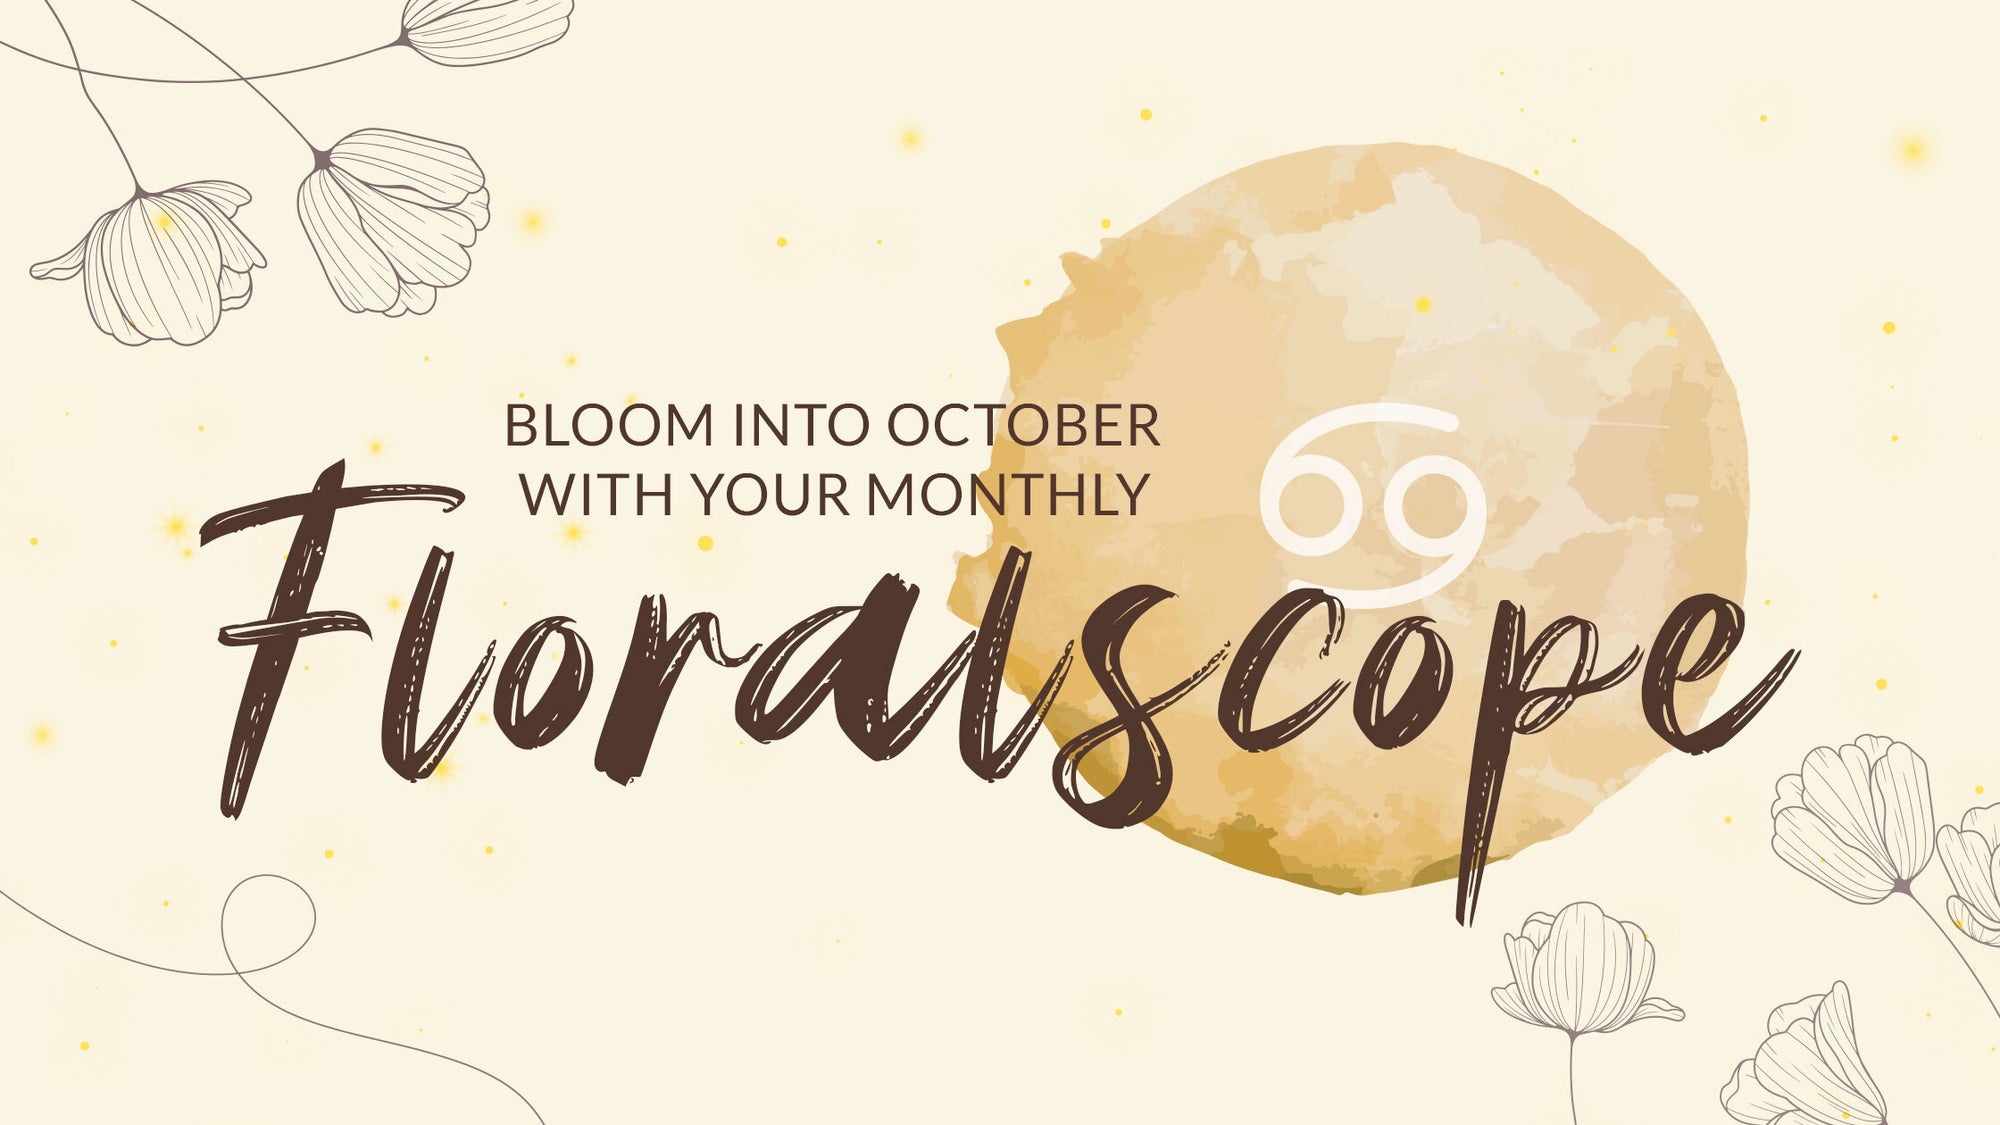 Your October Florascopes!